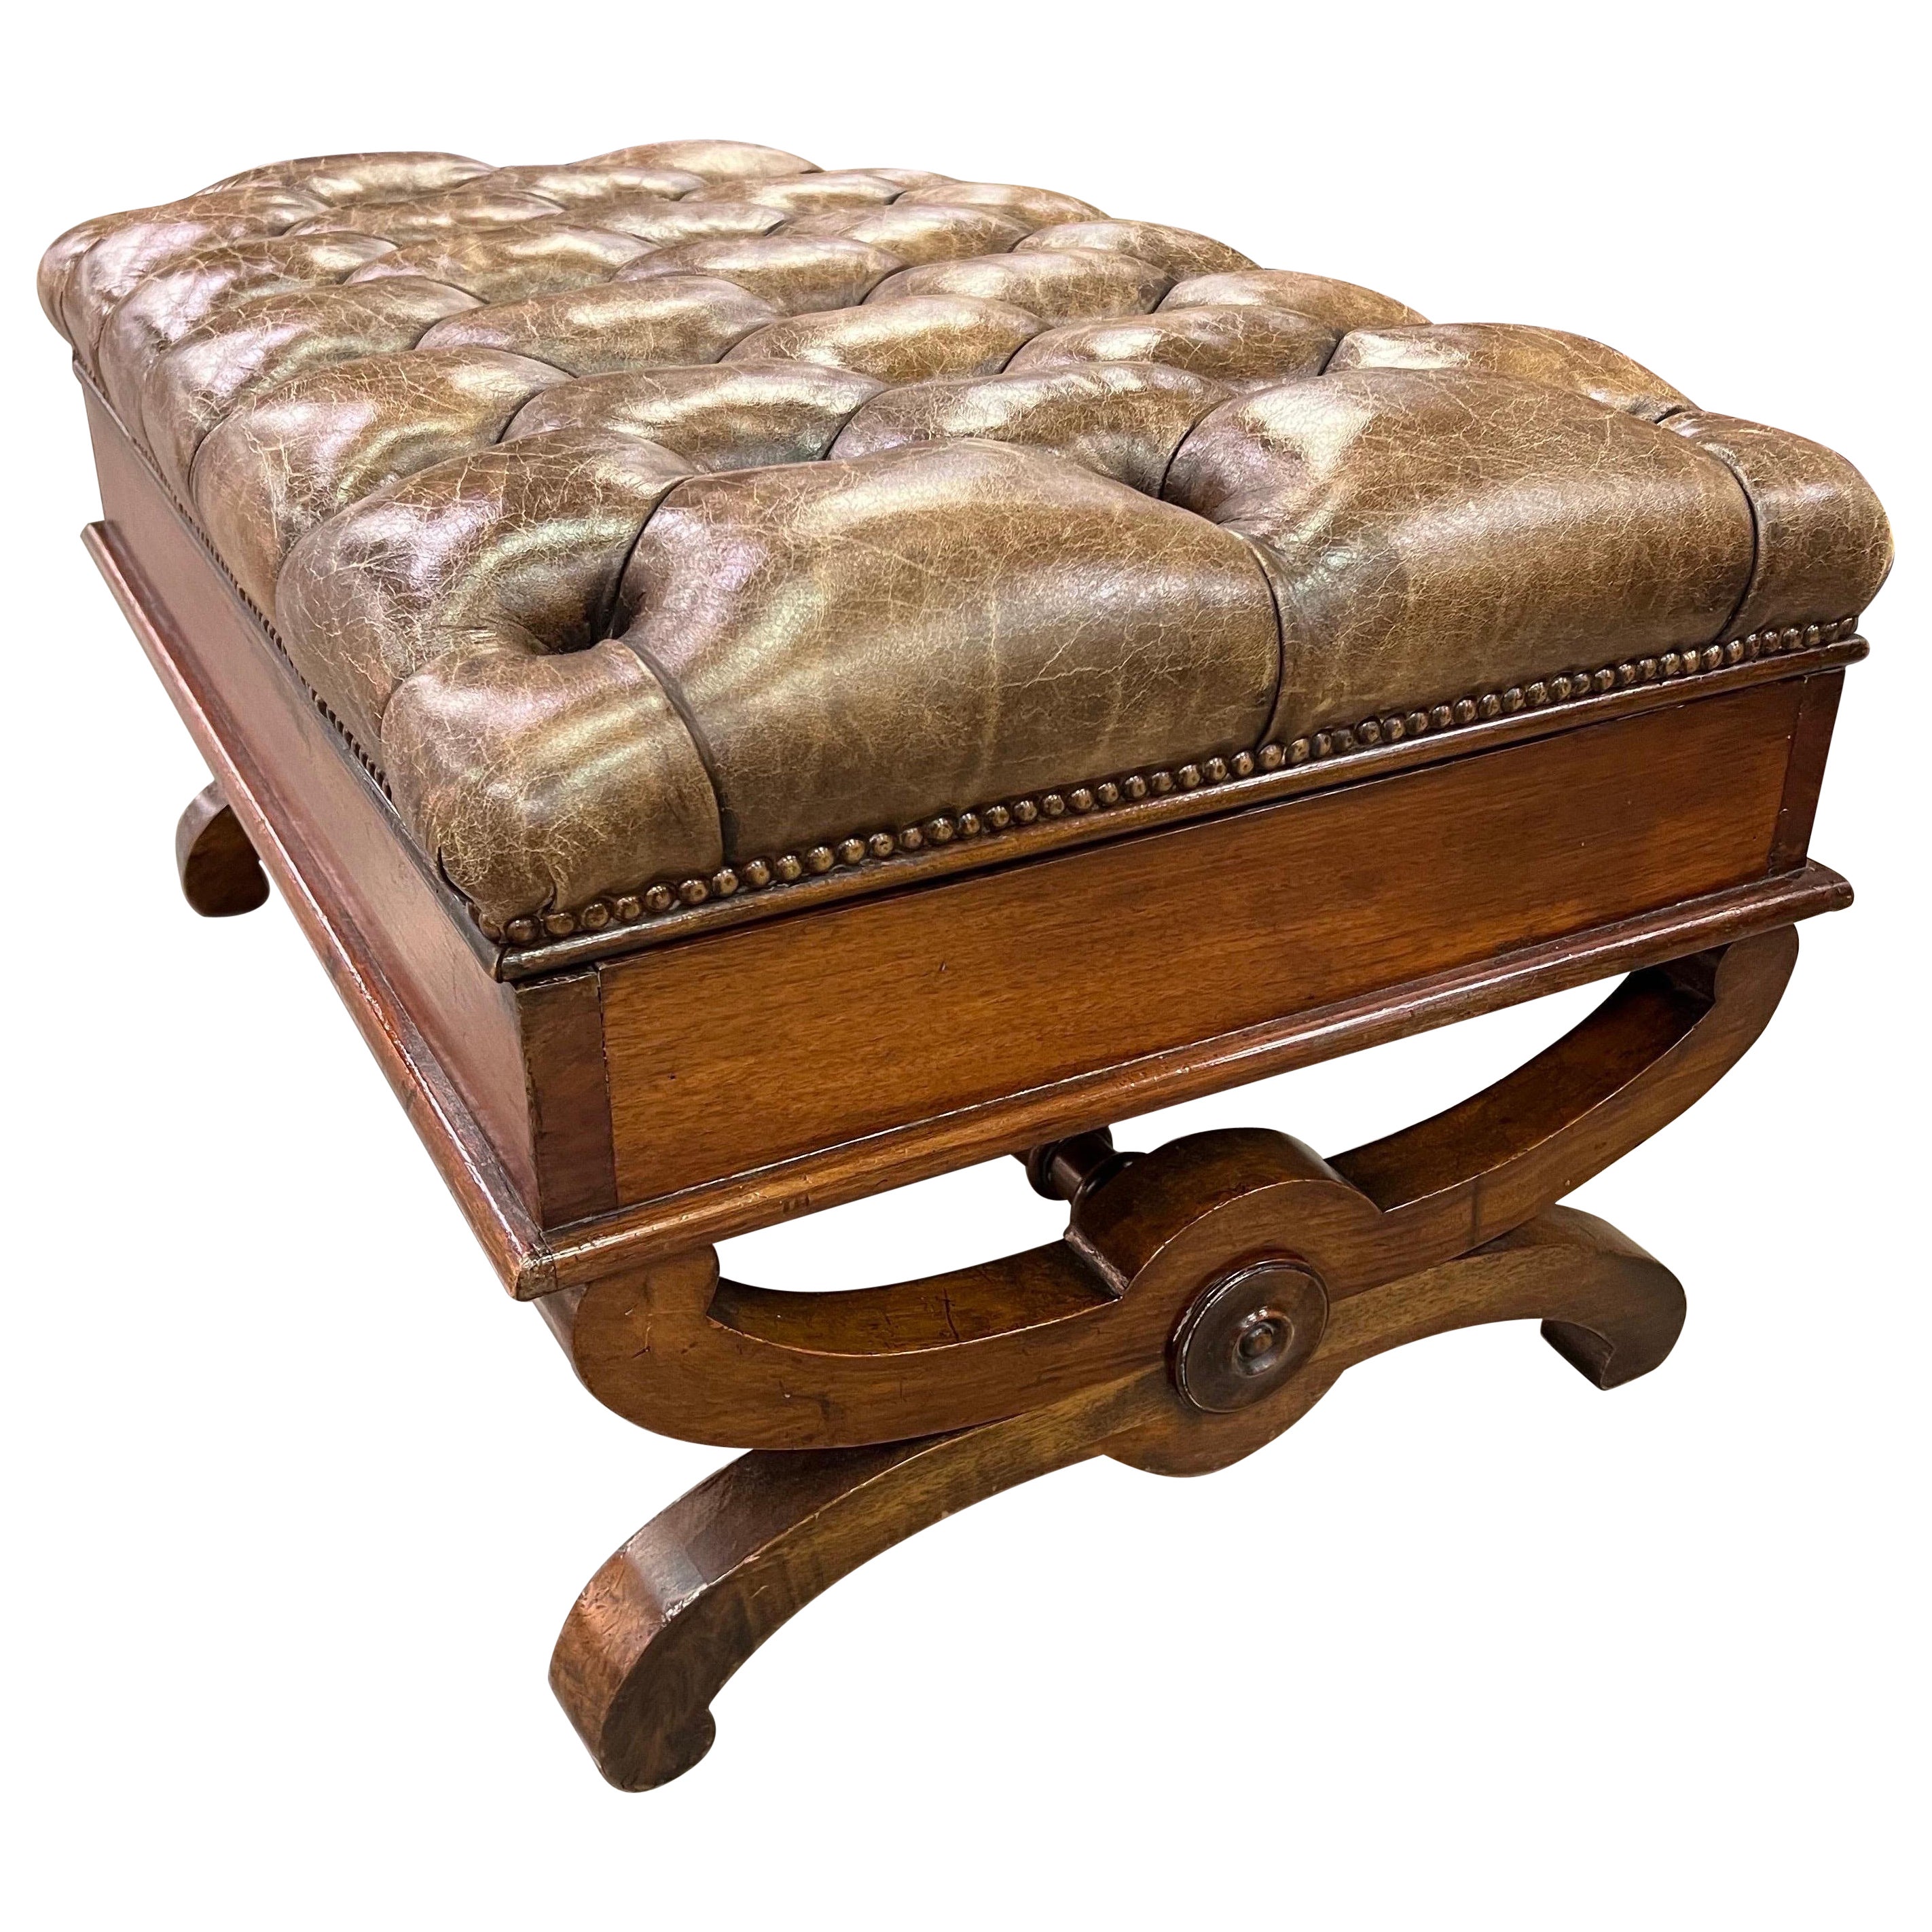 19th Century, English Mahogany and Tufted Leather Ottoman with Storage